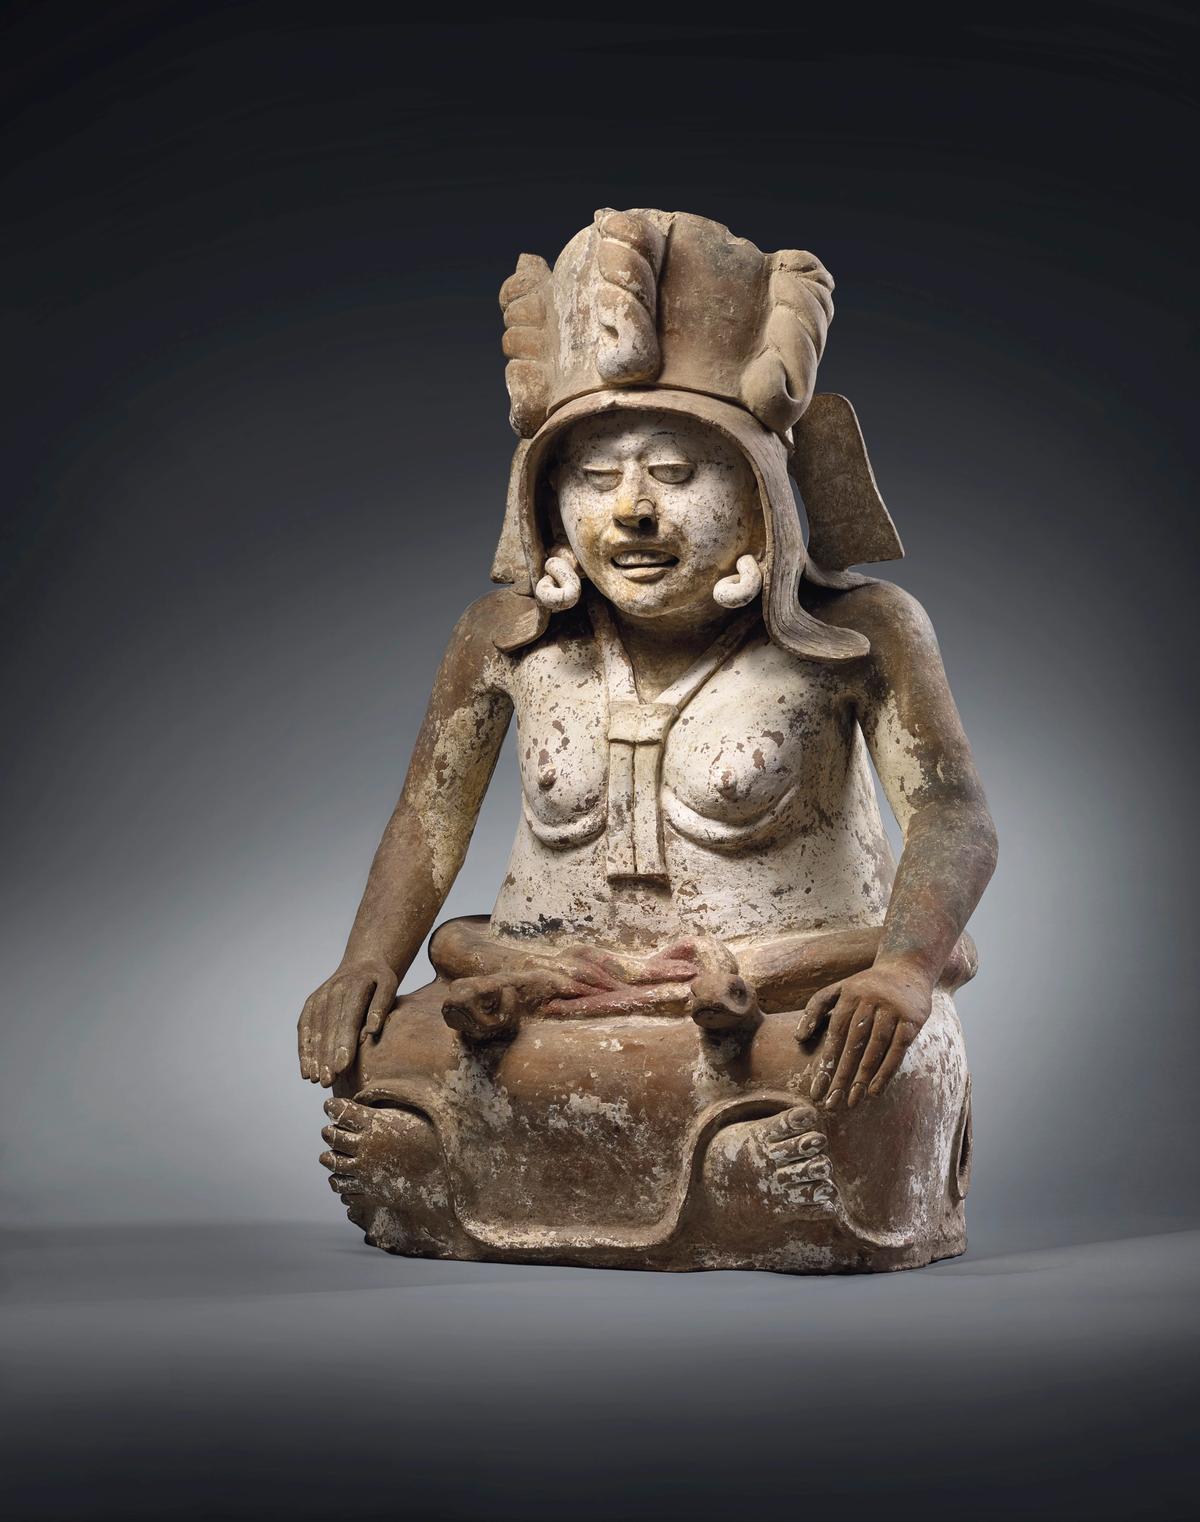 A Veracruz figure of Cihuateotl, a fertility goddess sitting with her legs crossed under her skirt, estimate €600,000-900,000 © Christie’s Images Ltd, 2021